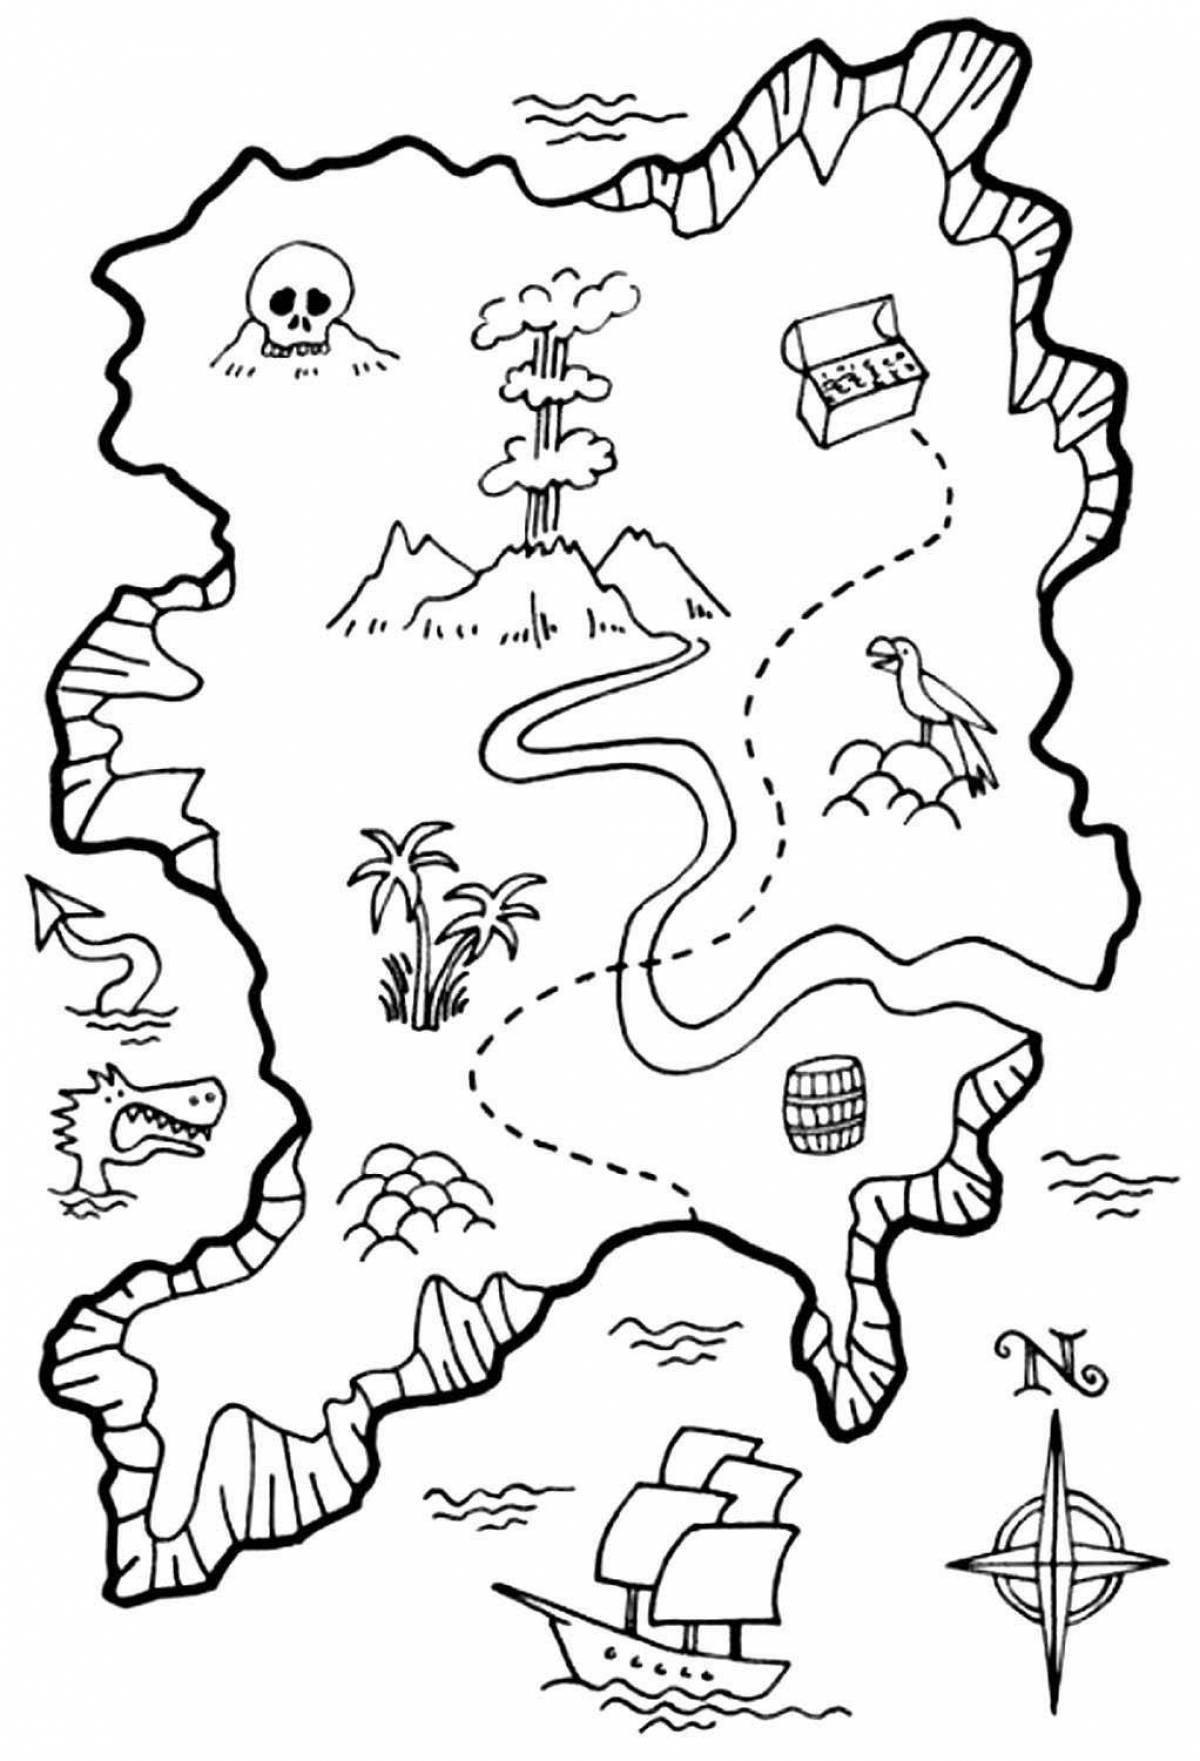 Exciting pirate map coloring page